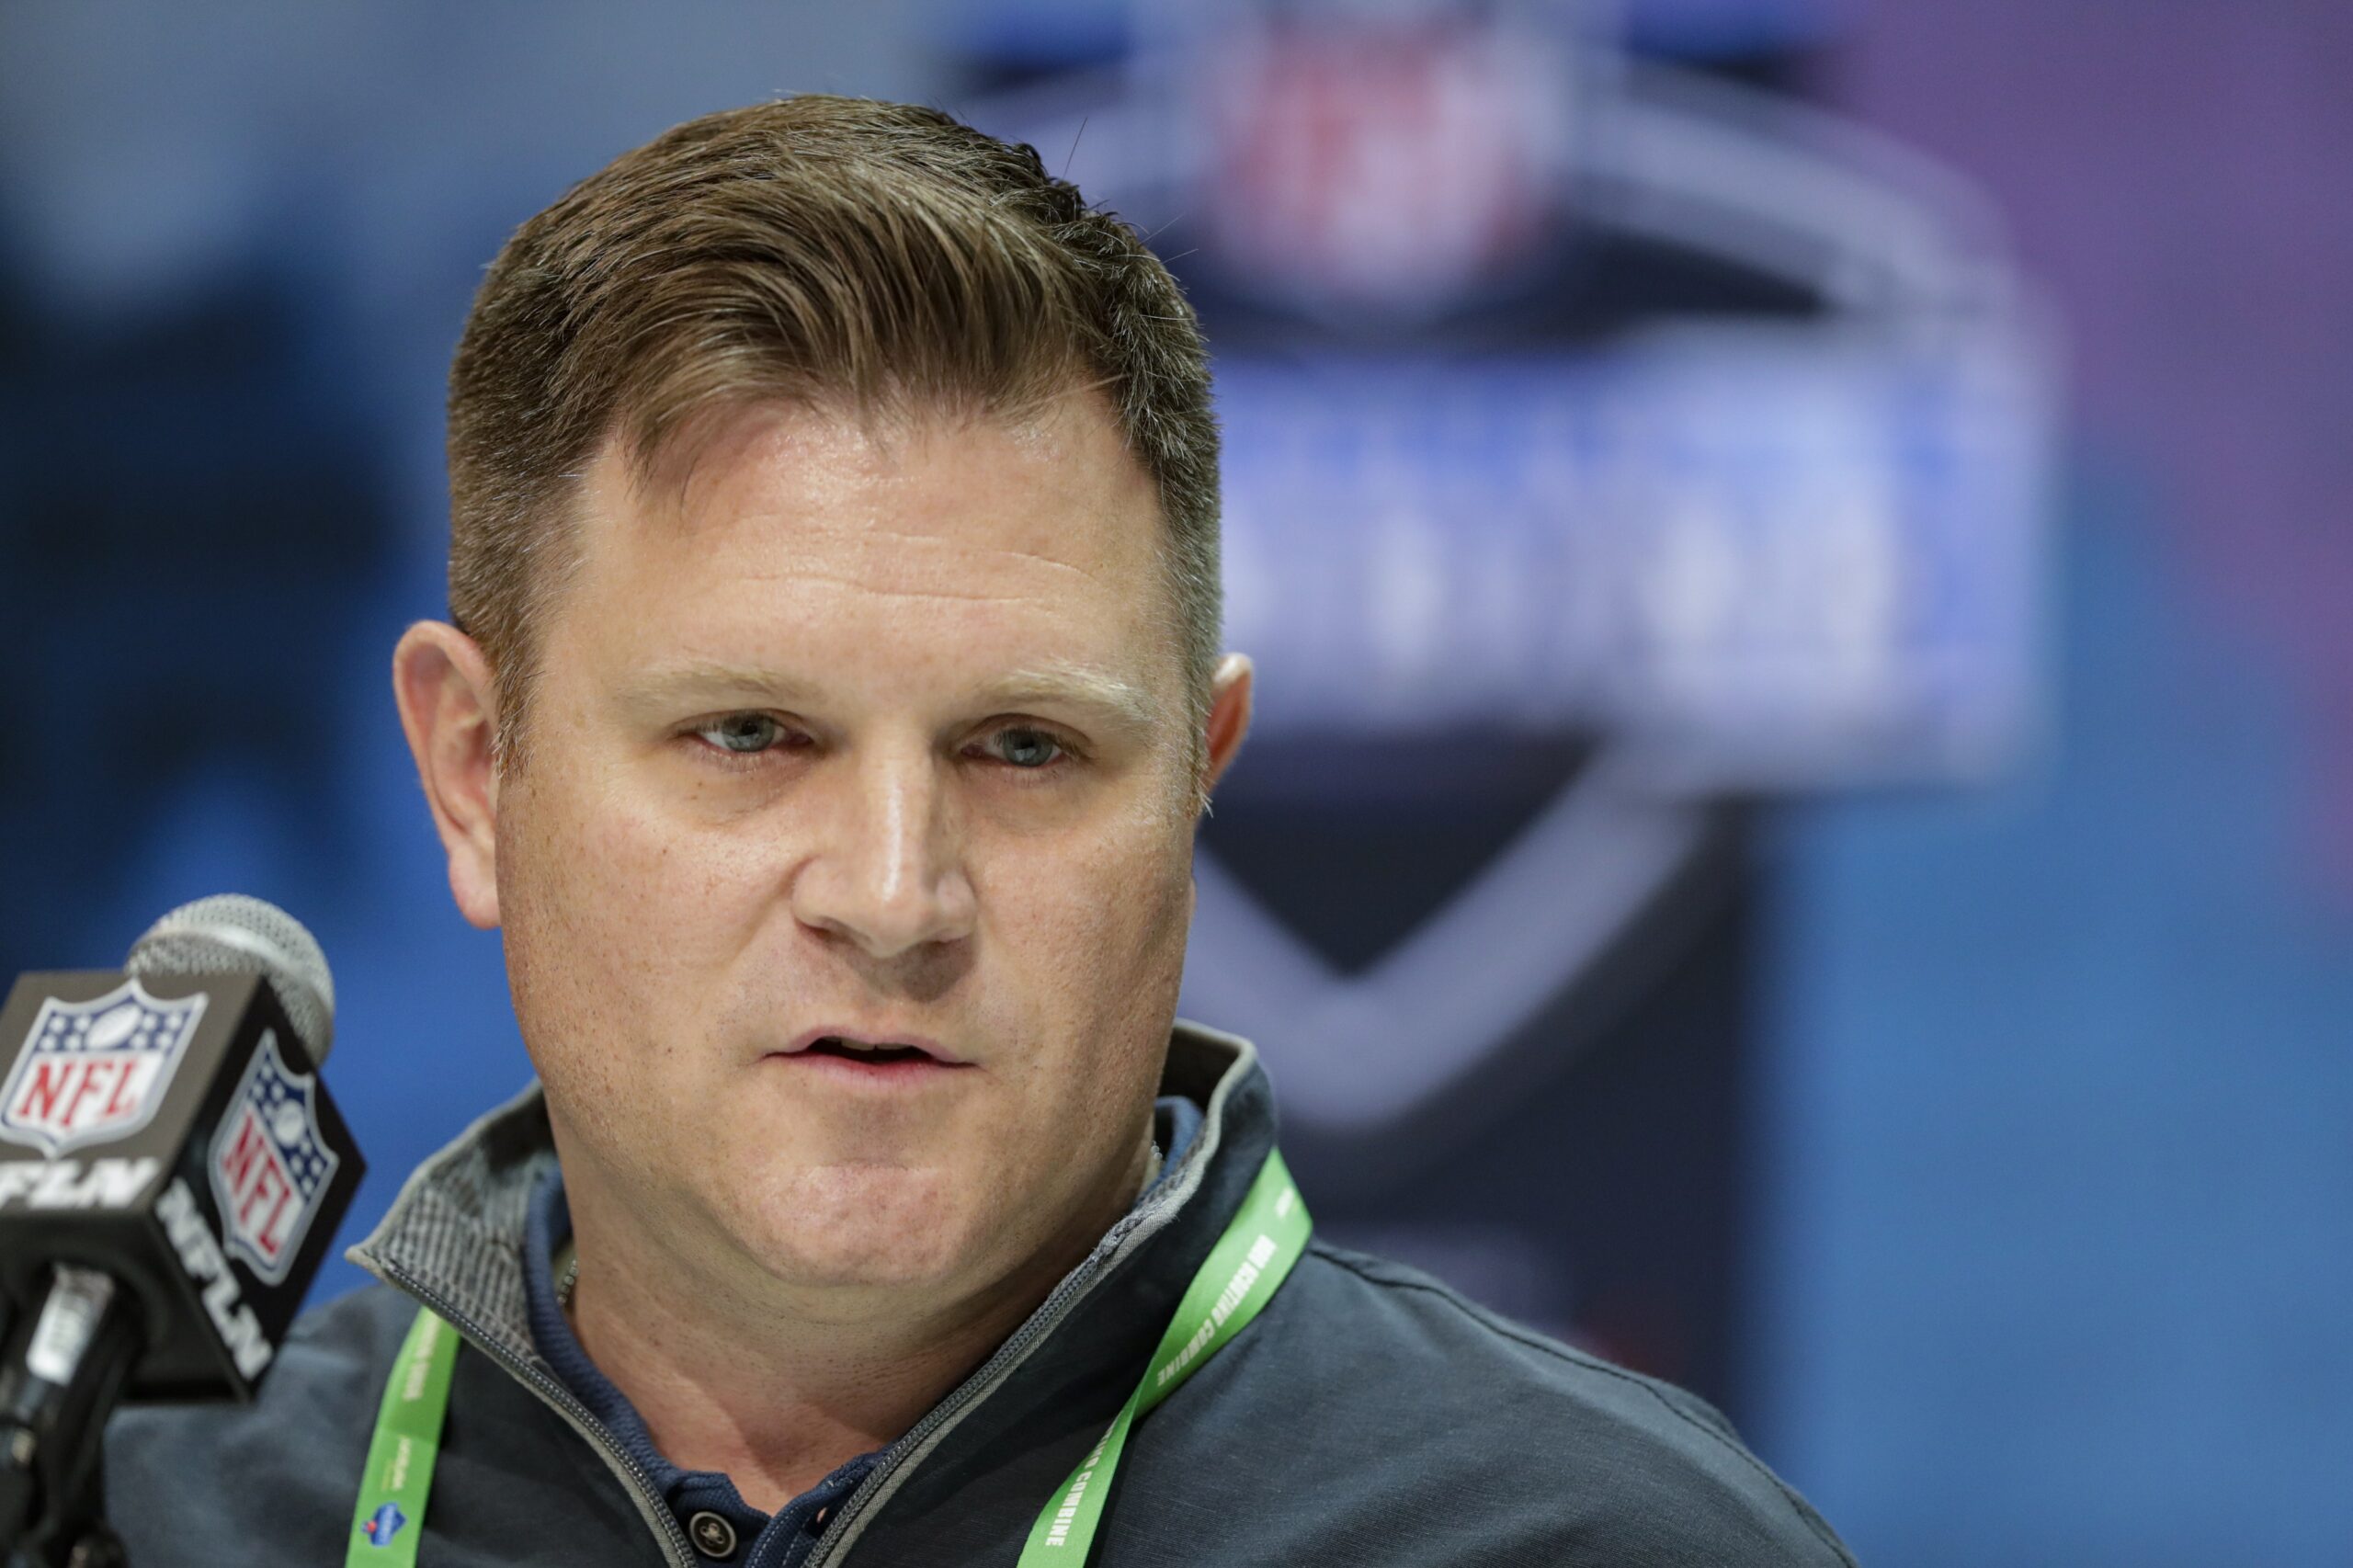 Green Bay Packers general manager Brian Gutekunst speaks during a press conference at the NFL football scouting combine